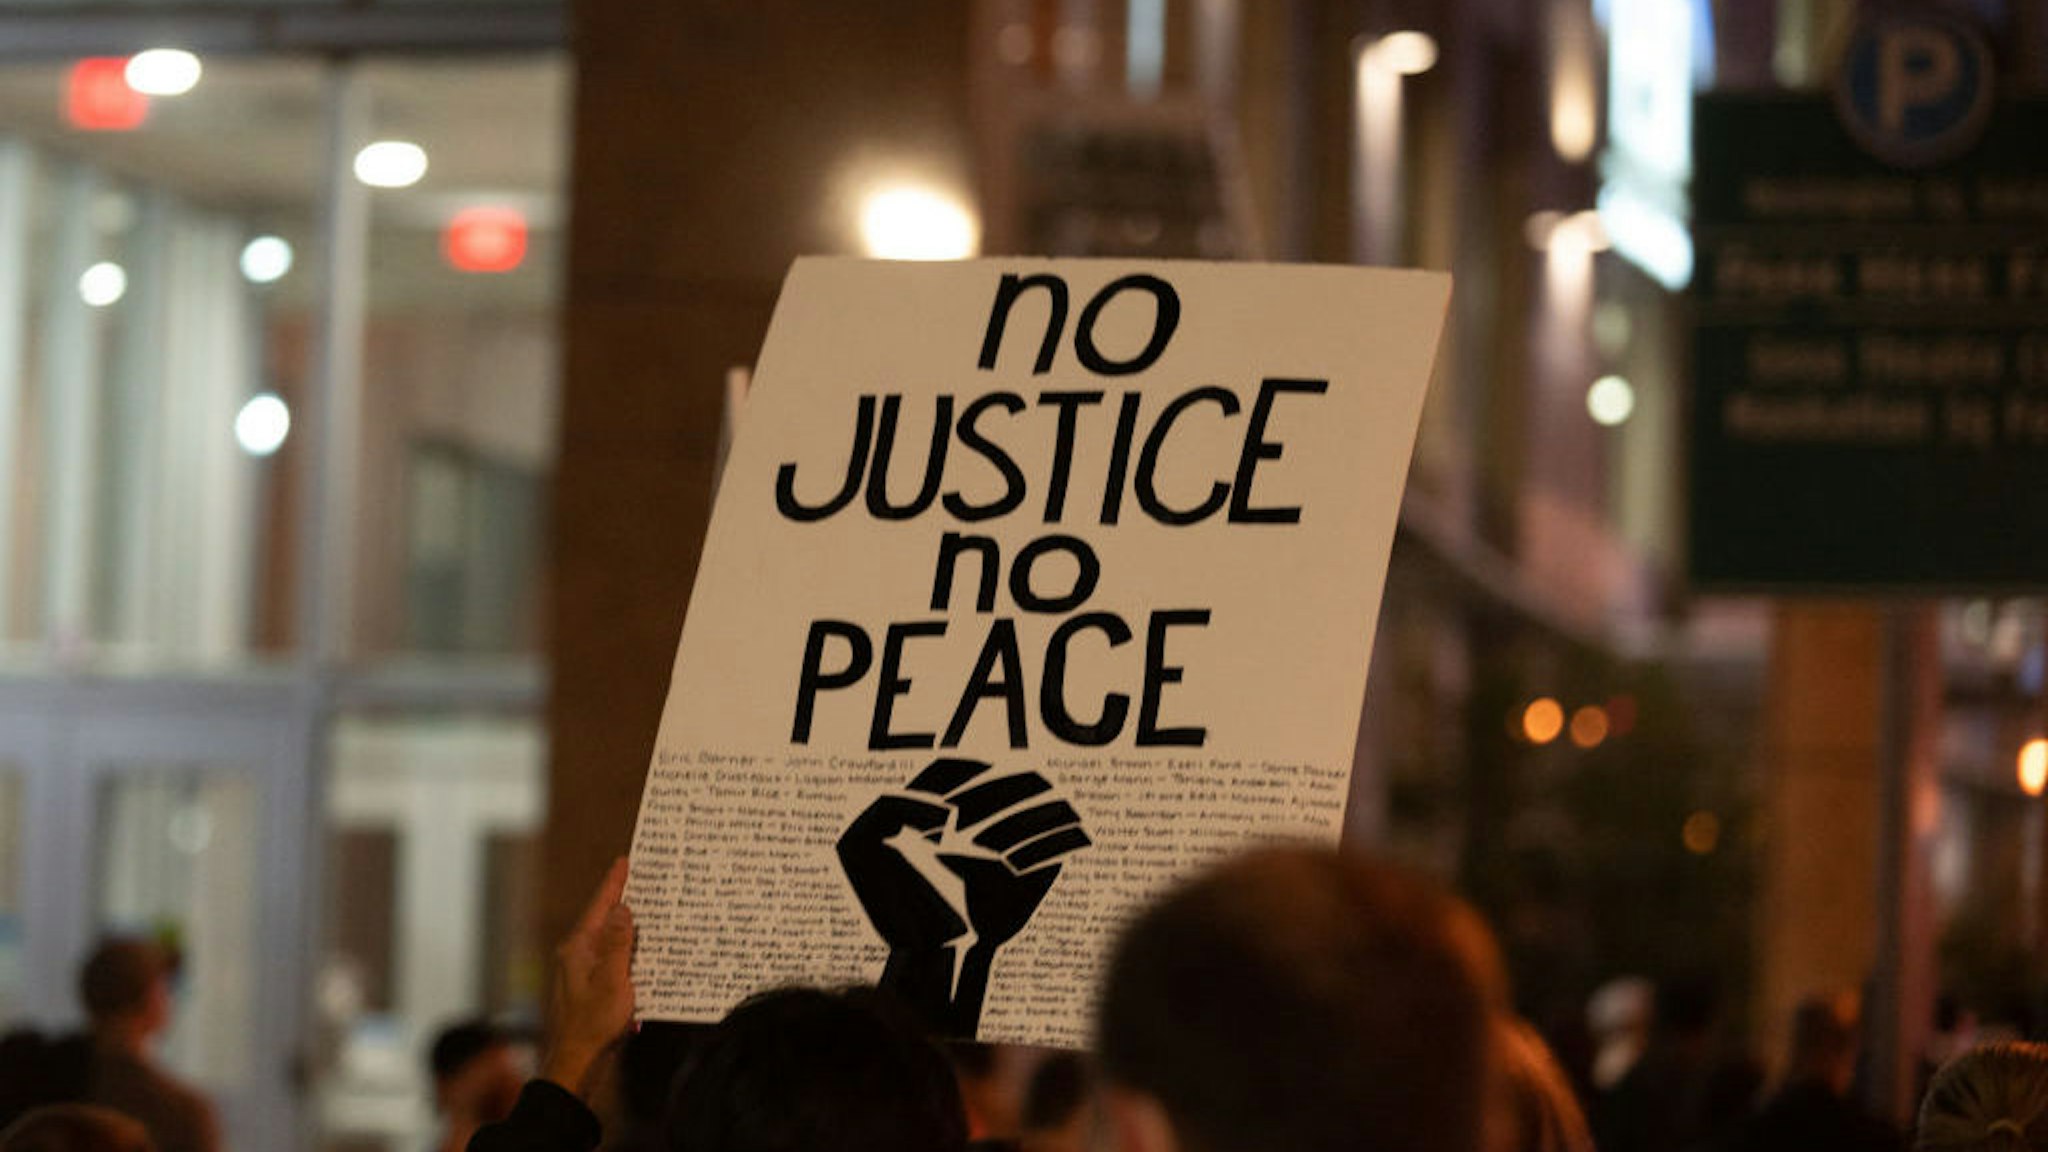 Protests in Rochester, NY over the death of Daniel Prude continue, with thousands in the street and more police violence, September, 5th, 2020. (Photo by Zach D Roberts/NurPhoto via Getty Images)